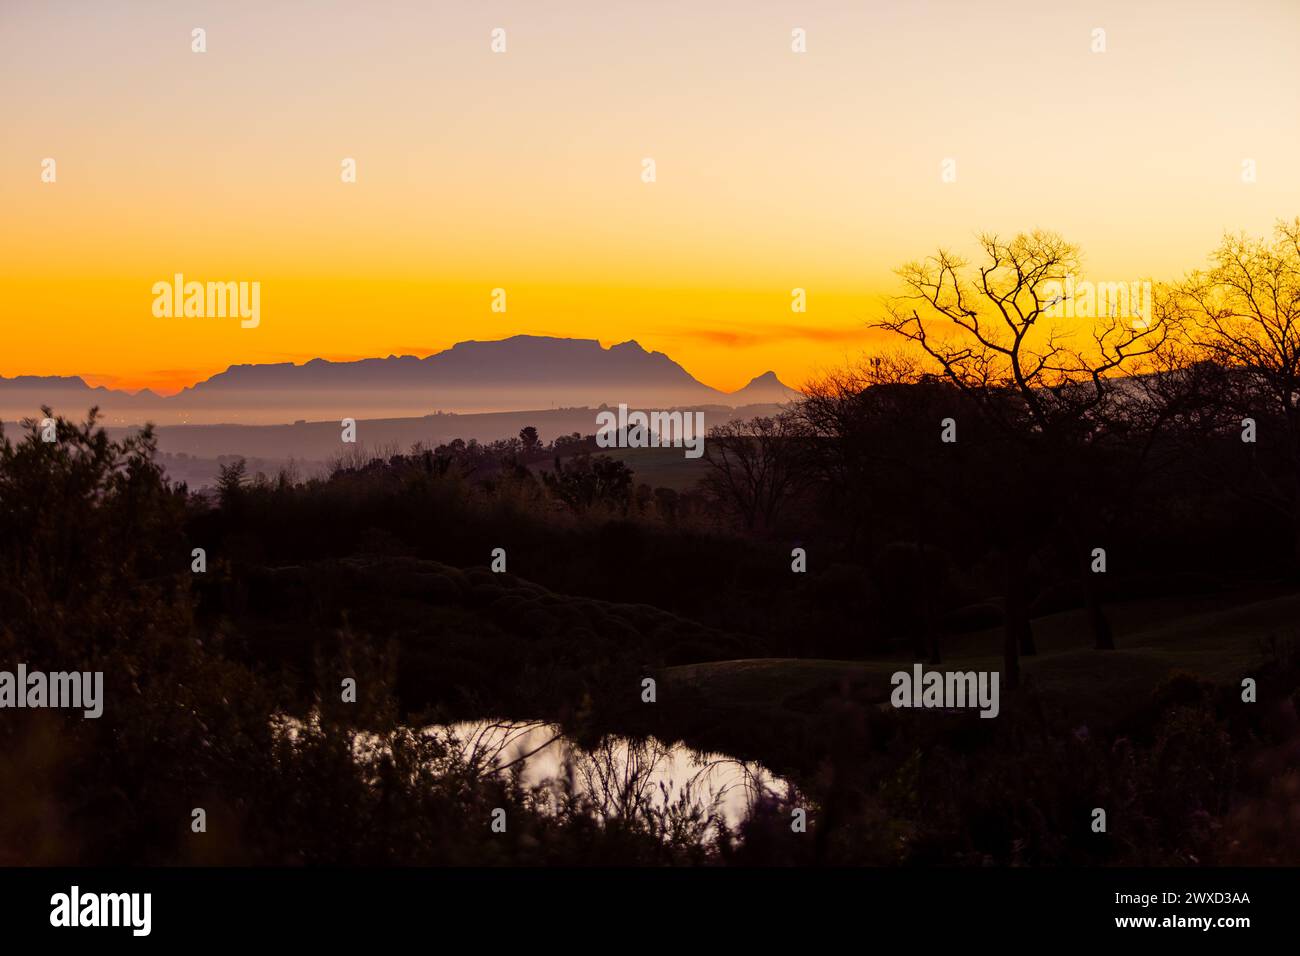 Silhouette of Table Mountain against a dusk sunset sky in Cape Town, South Africa Stock Photo